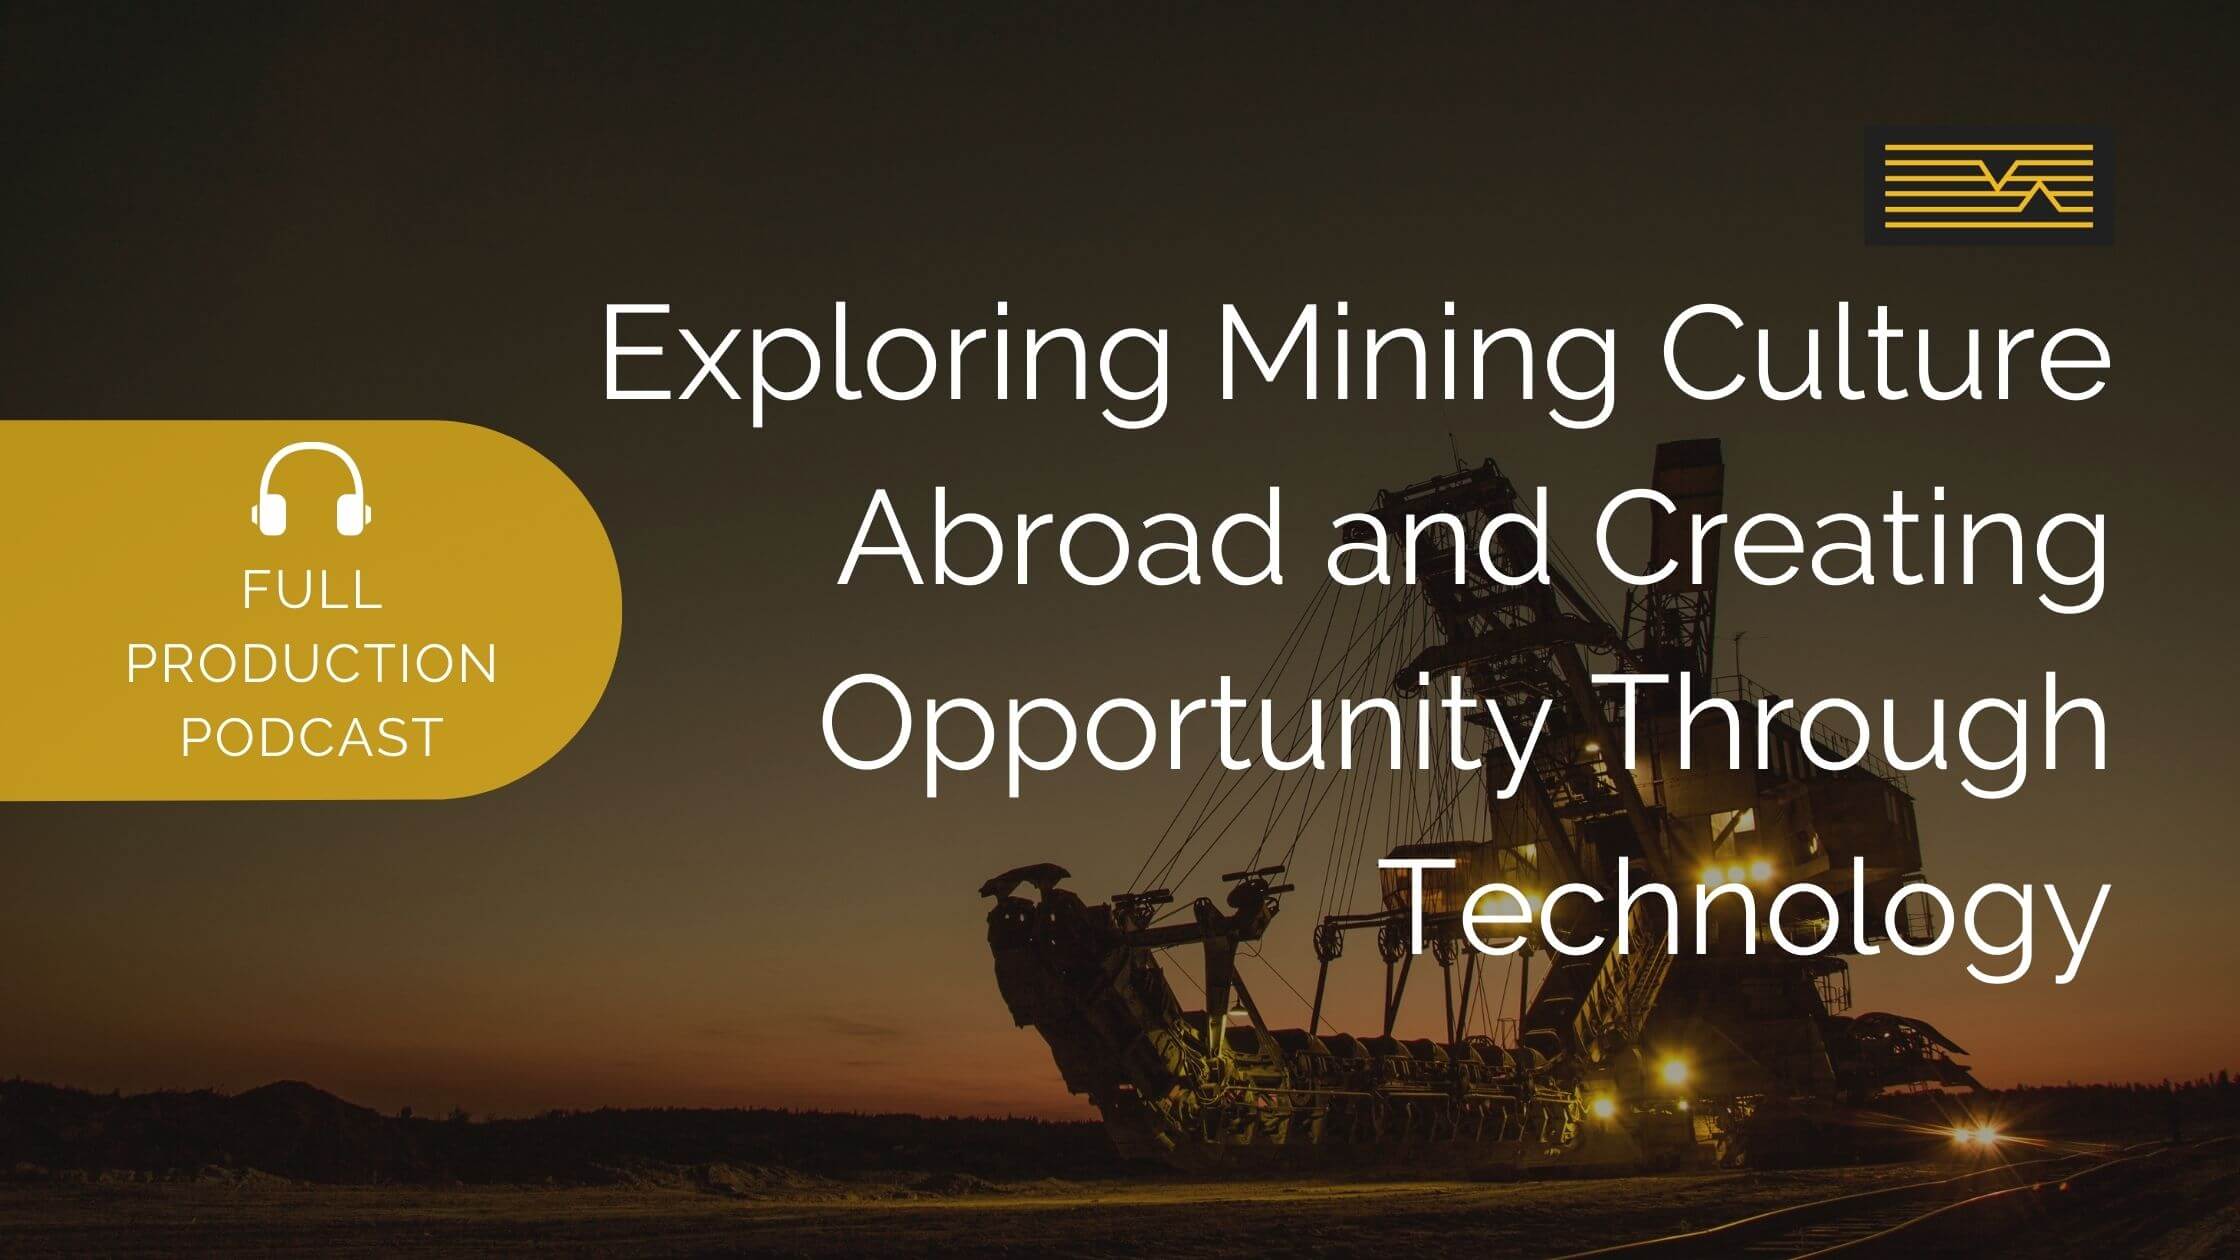 Exploring Mining Culture Abroad and Creating Opportunity Through Technology